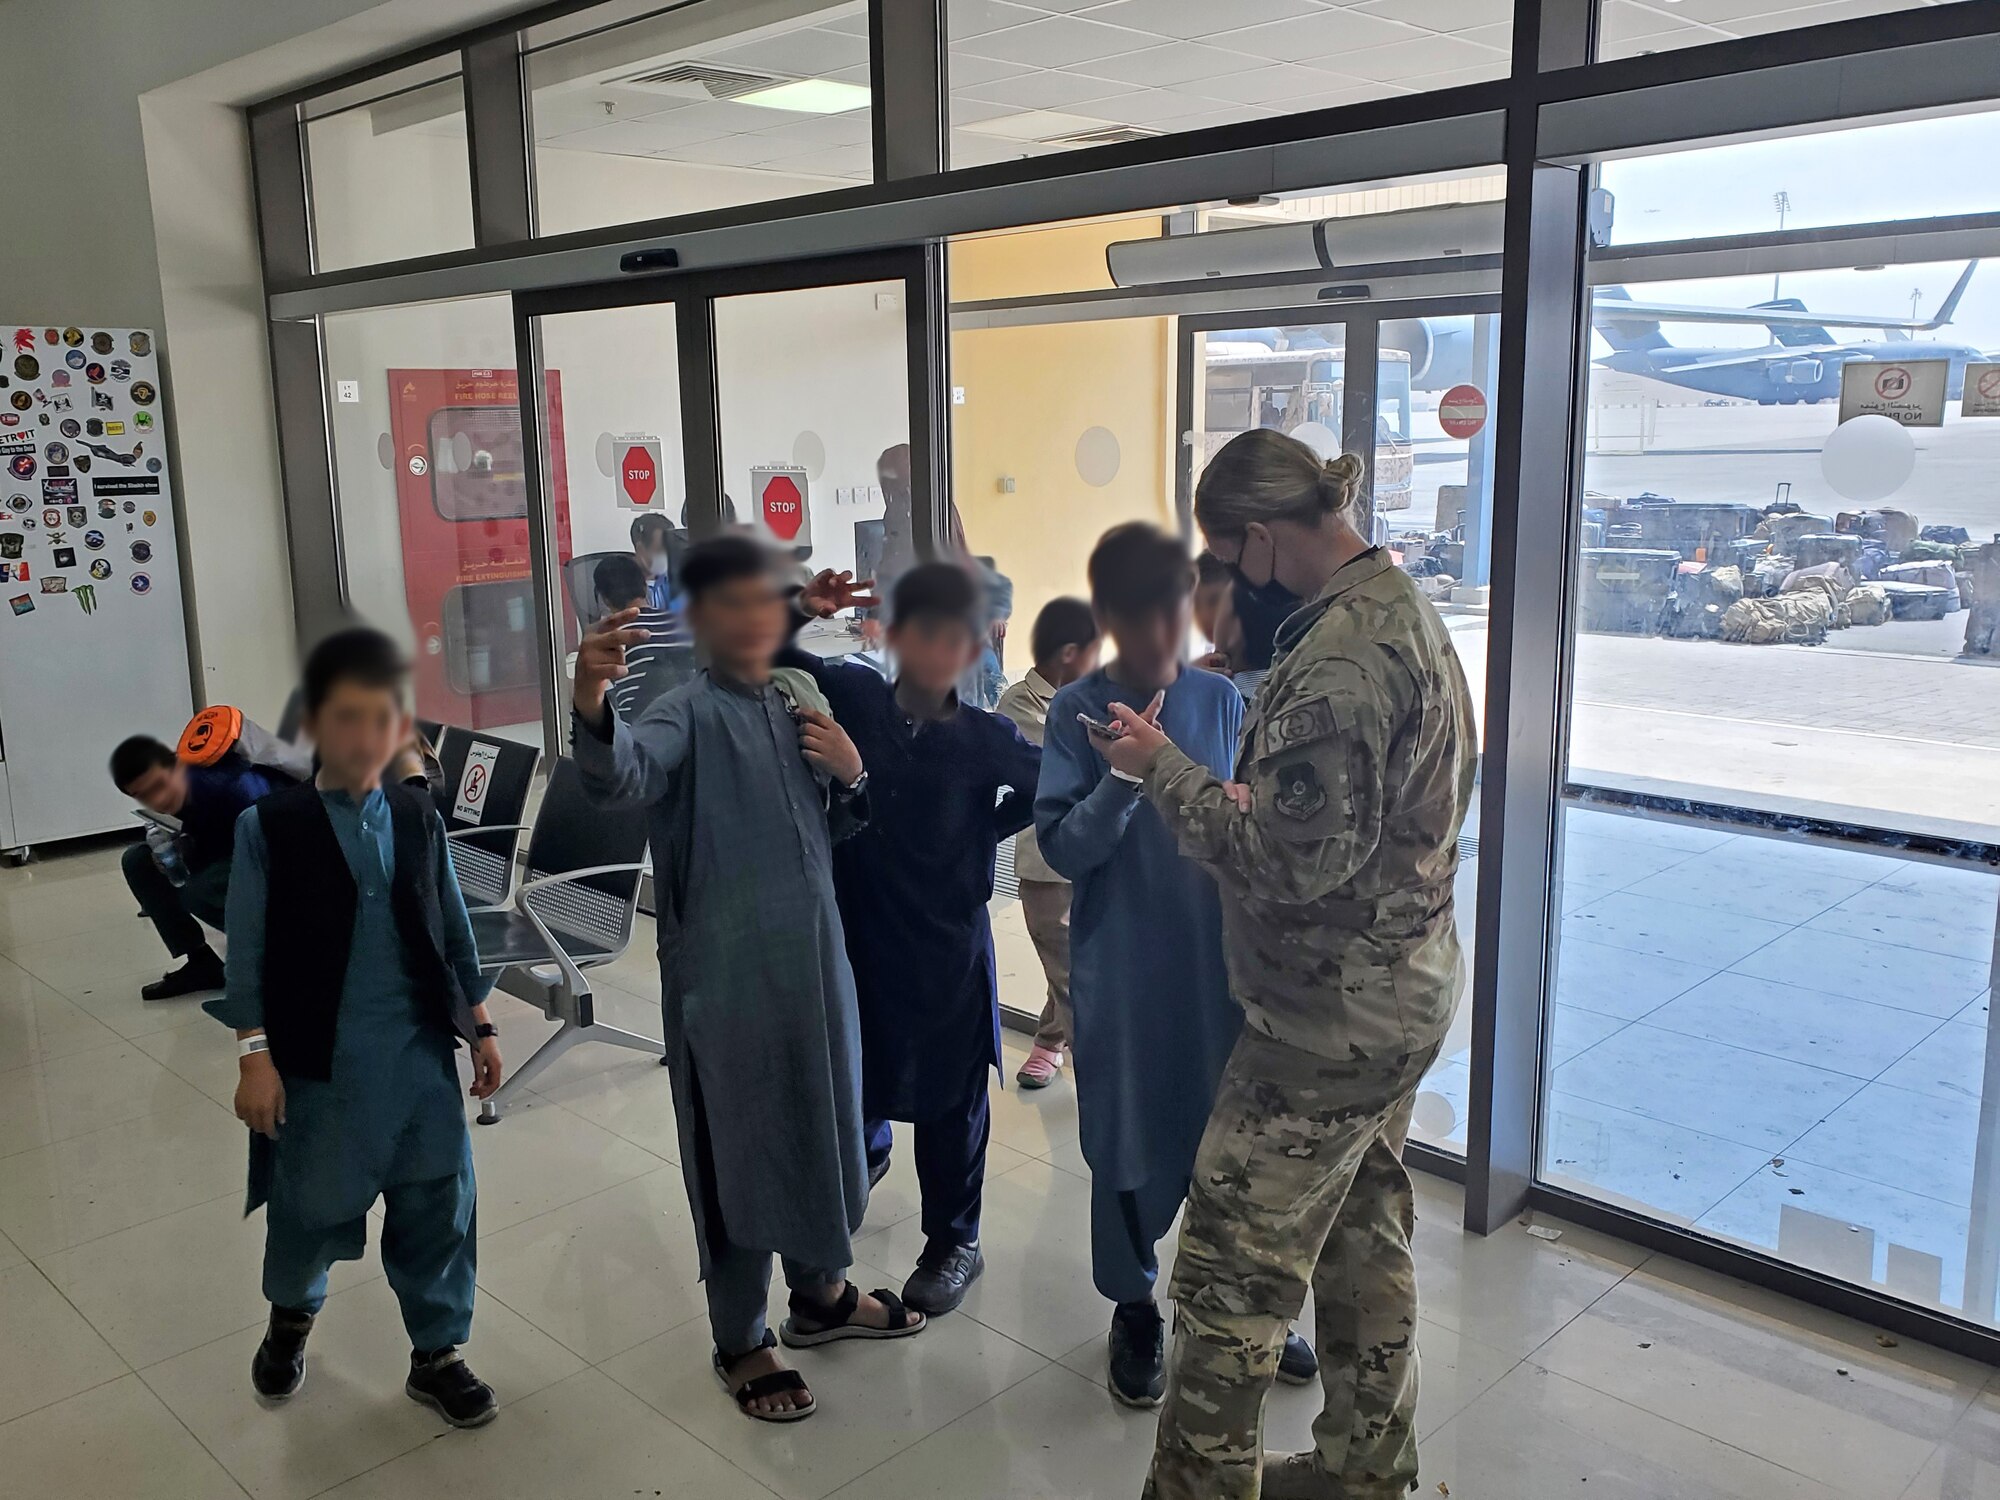 U.S. Air Force Airman 1st Class Cassandra Wesley, a boom operator assigned to the 91st Air Refueling Squadron (ARS) and children from Afghanistan interact in a passenger terminal at Al Udeid Air Base, Qatar, Aug. 26, 2021